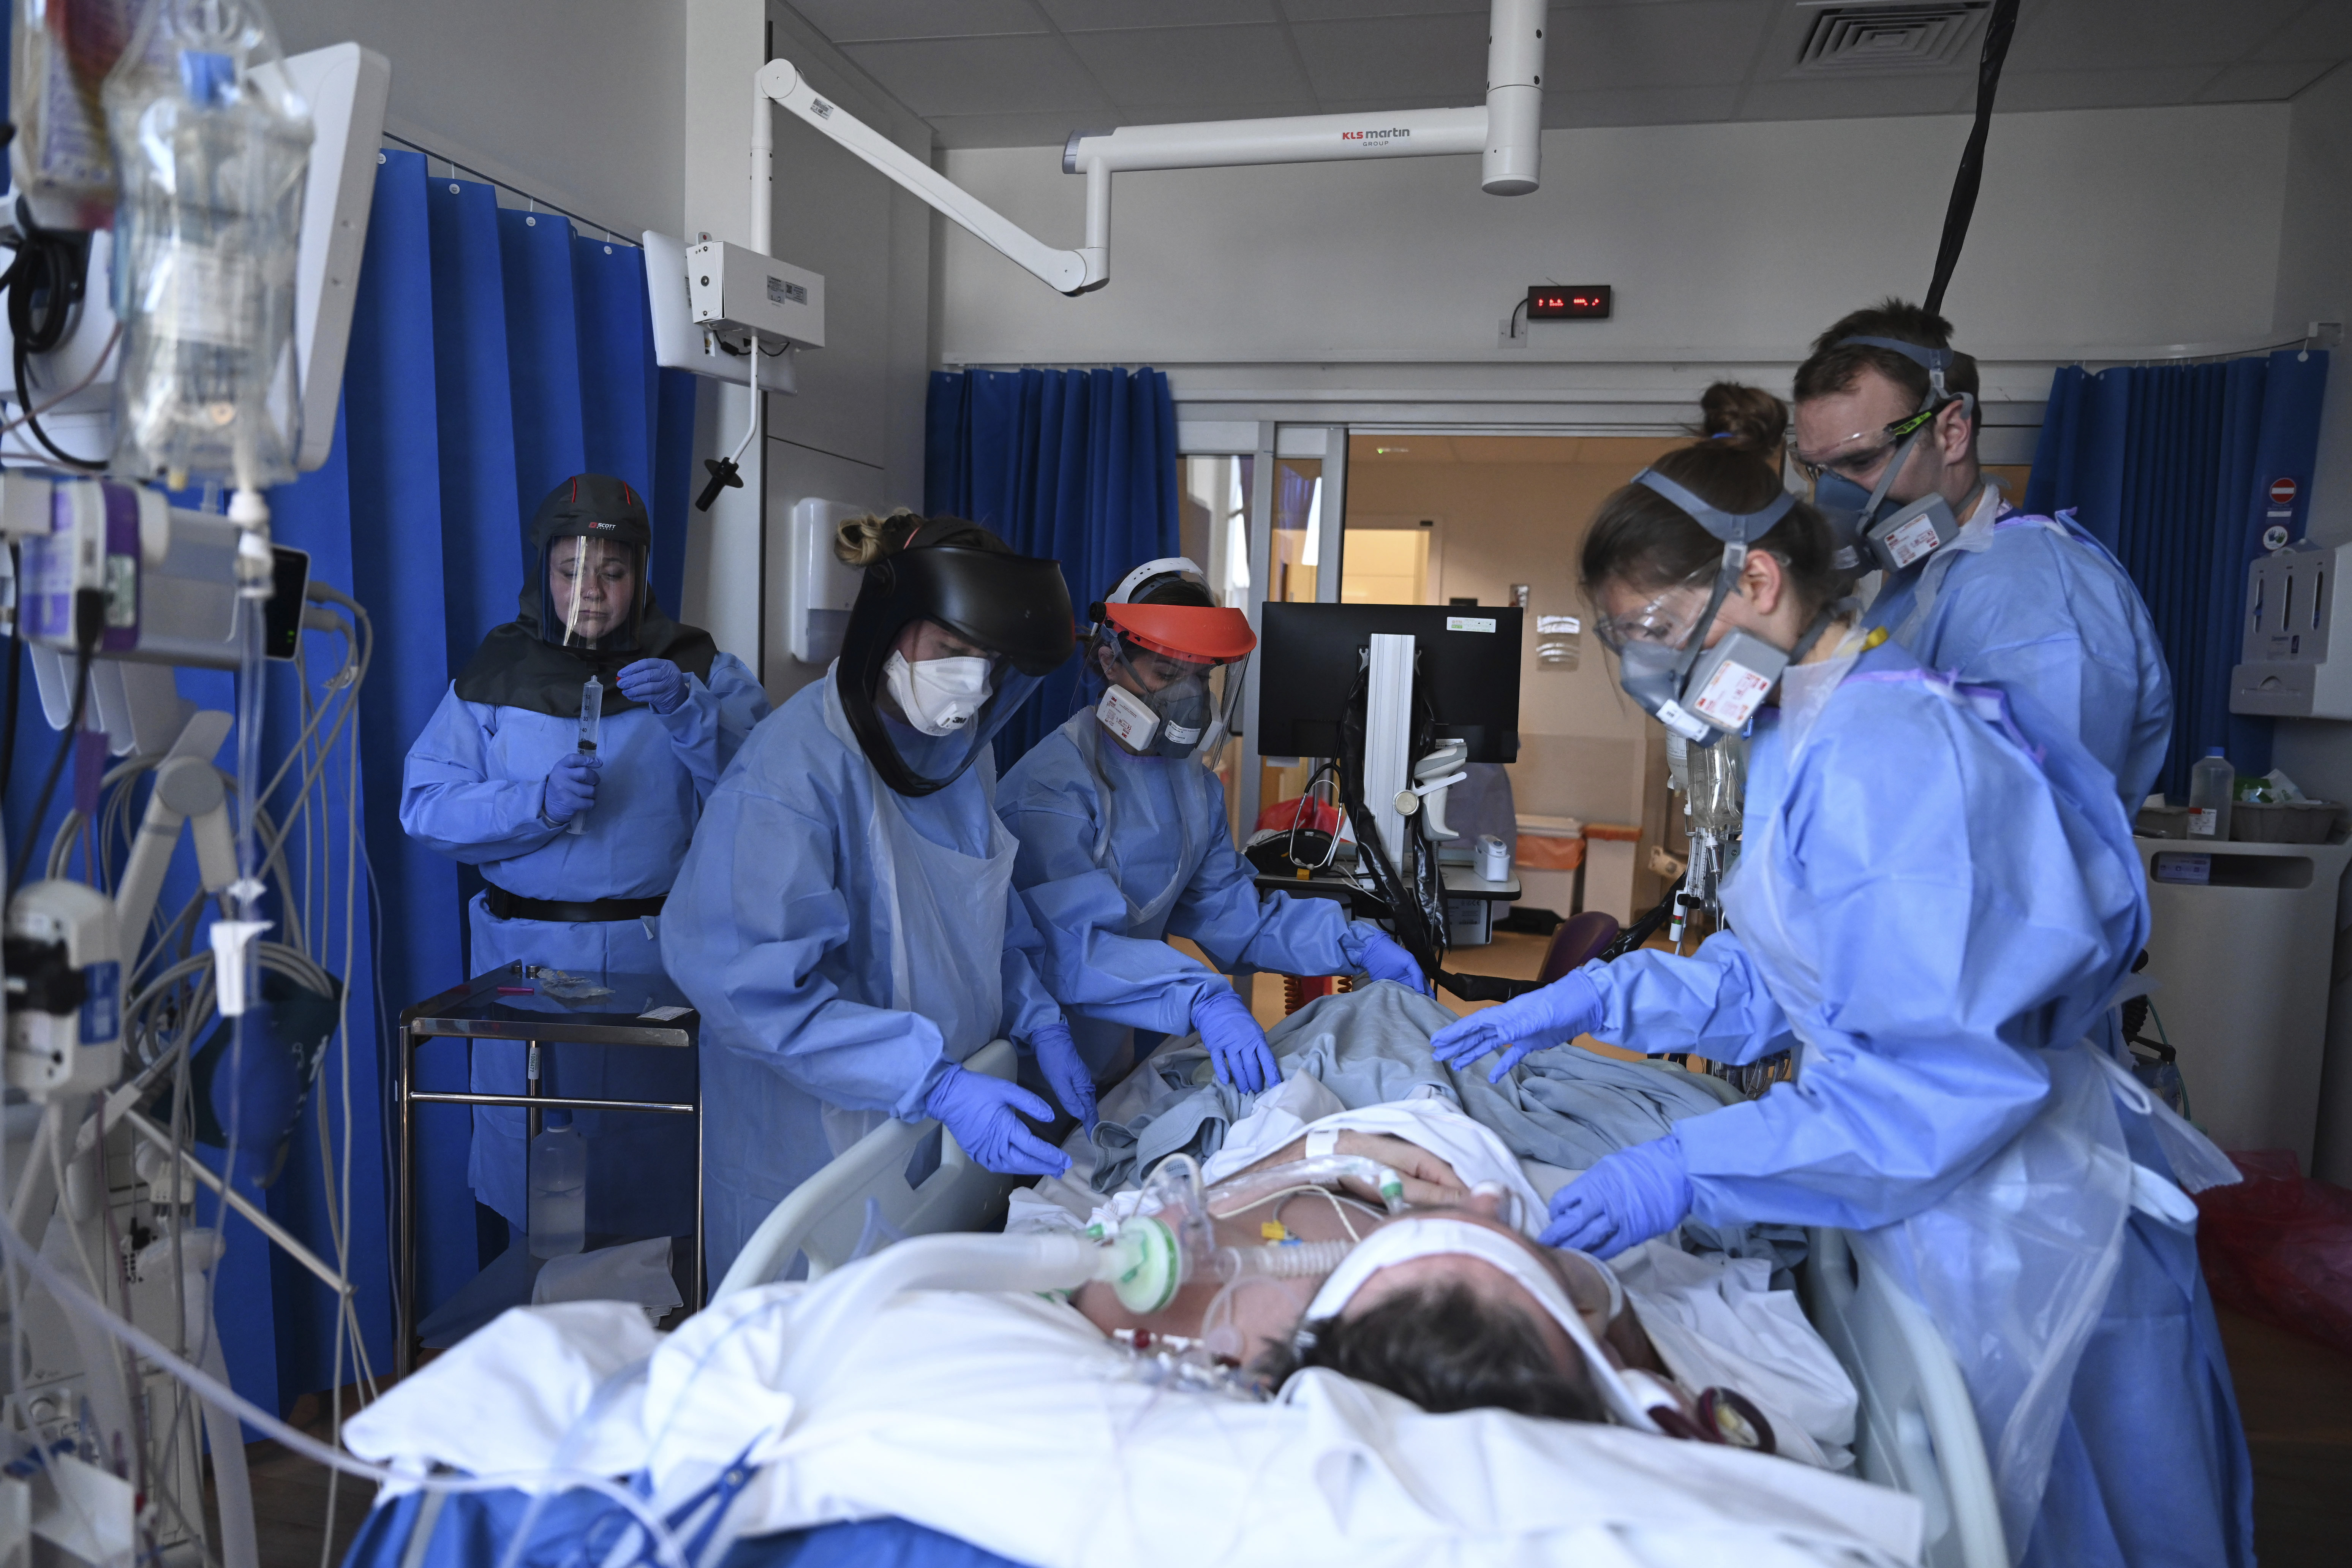 Members of the clinical staff wearing Personal Protective Equipment PPE care for a patient with coronavirus in the intensive care unit at the Royal Papworth Hospital in Cambridge, England, Tuesday May 5, 2020. Photo: AP